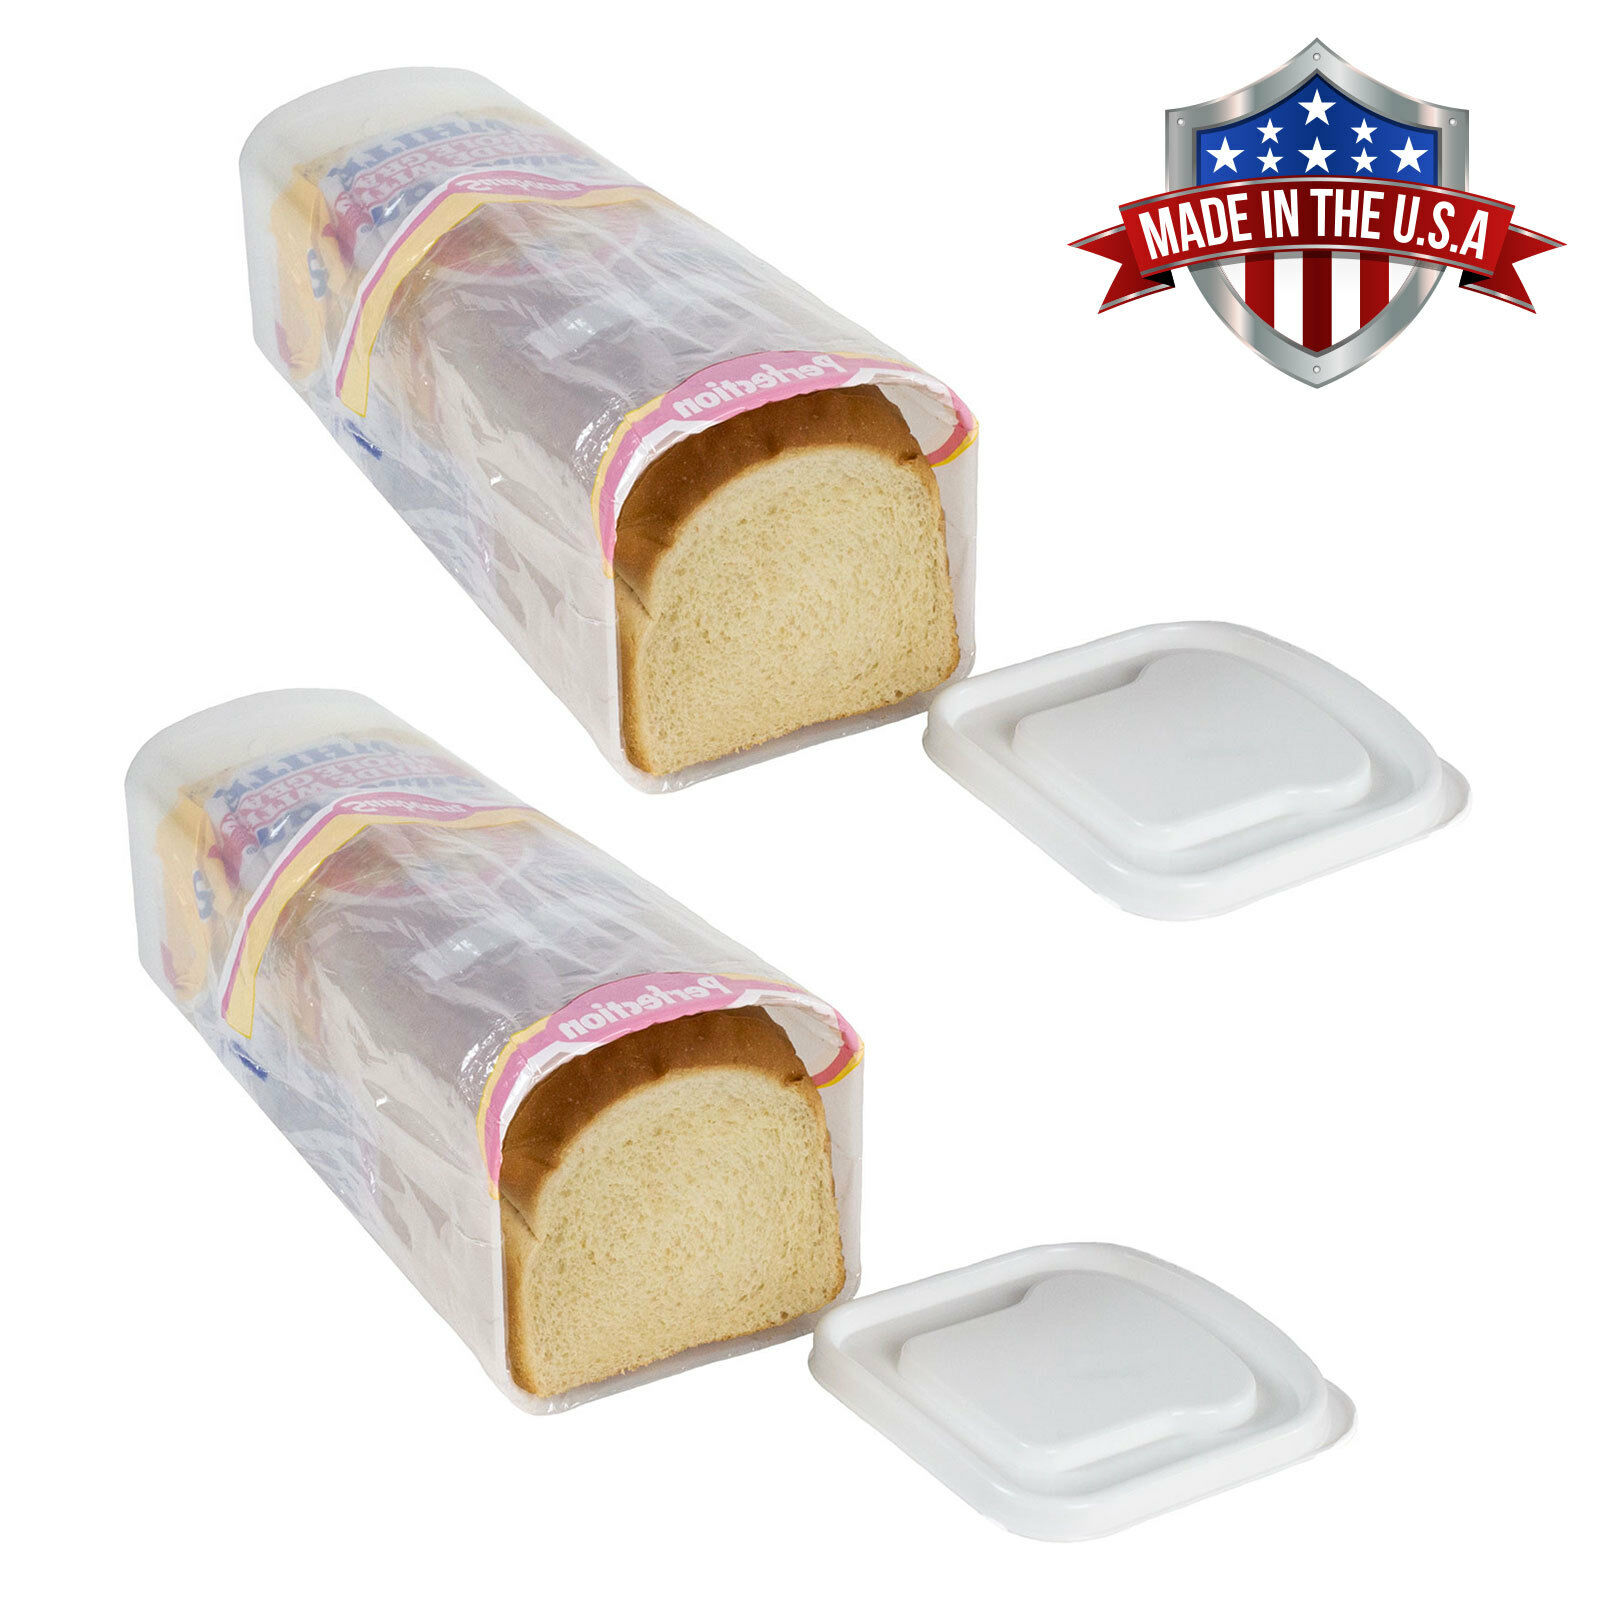 2 Pack Bread Keeper Holder Travel Sandwich Bread Box Crush-proof Containers